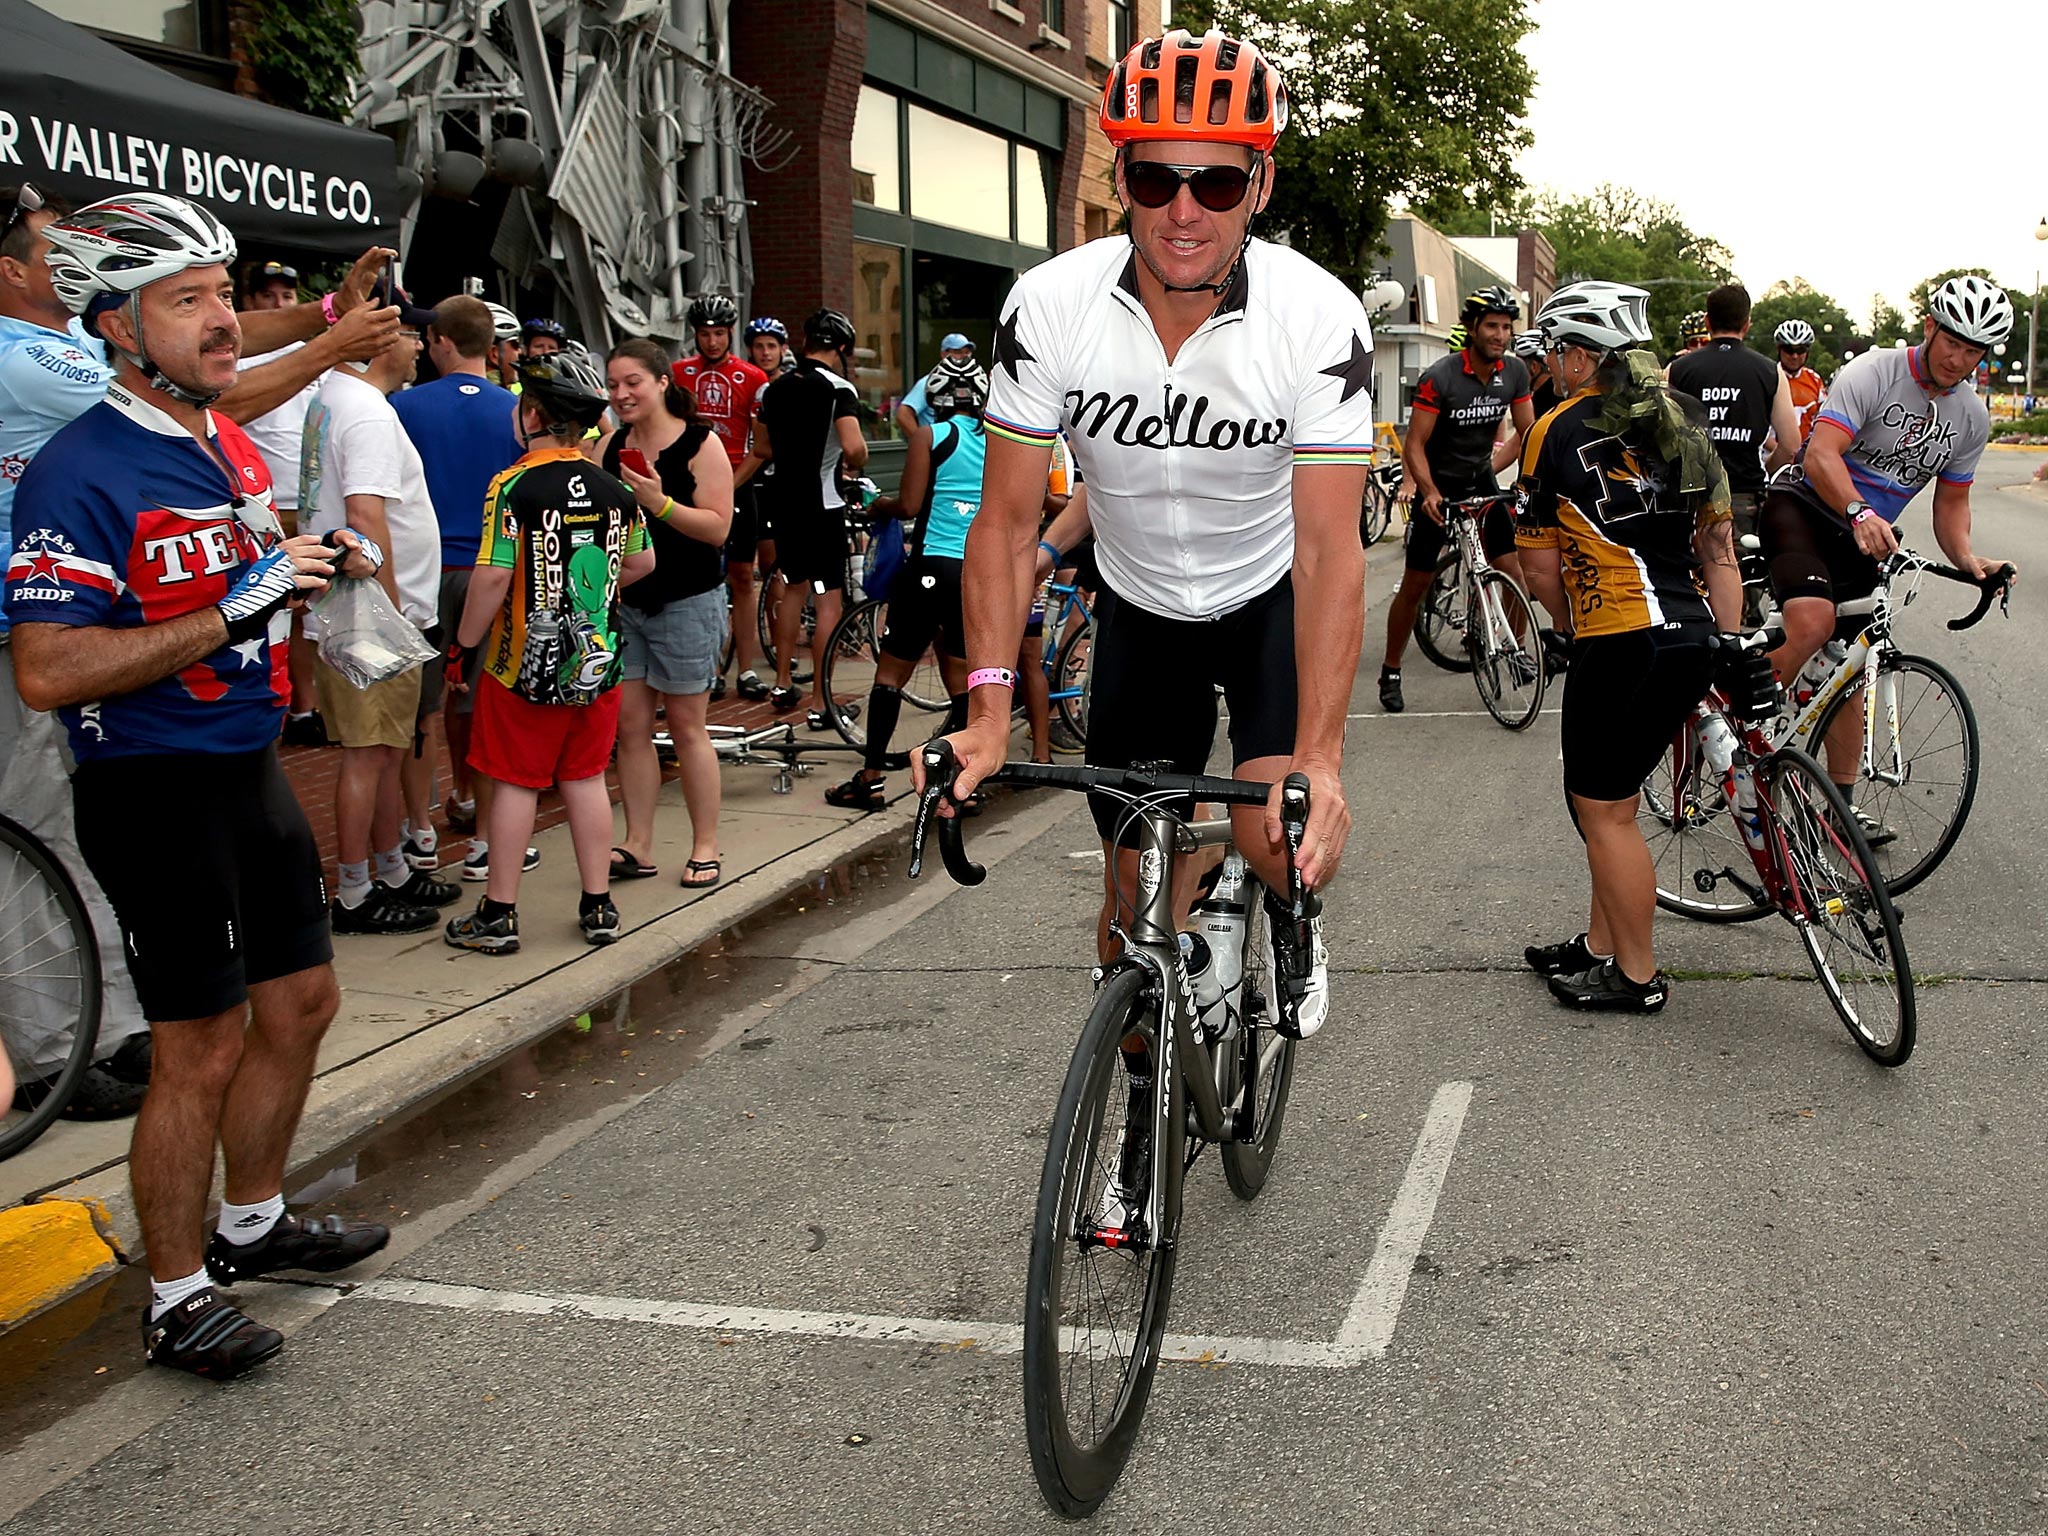 Lance Armstrong departs at the start of the third day of the RAGBRAI en route to West Des Moines on July 23, 2013 in Perry, Iowa